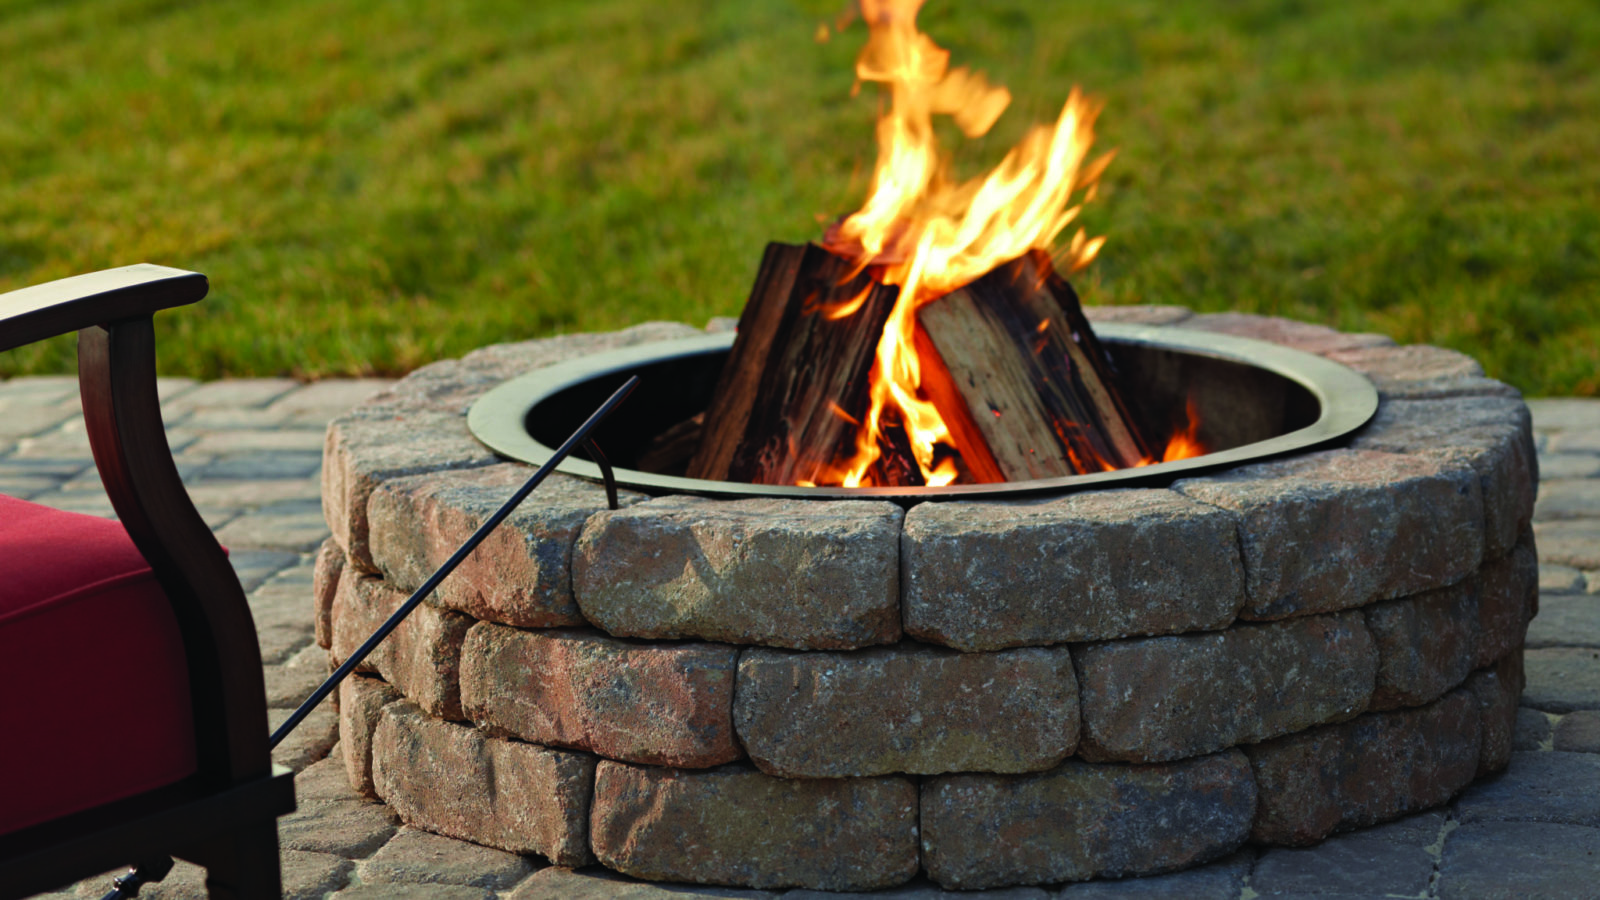 Gas Vs Wood Fire Pit Pros And Cons, Do You Need A Permit For Fire Pit